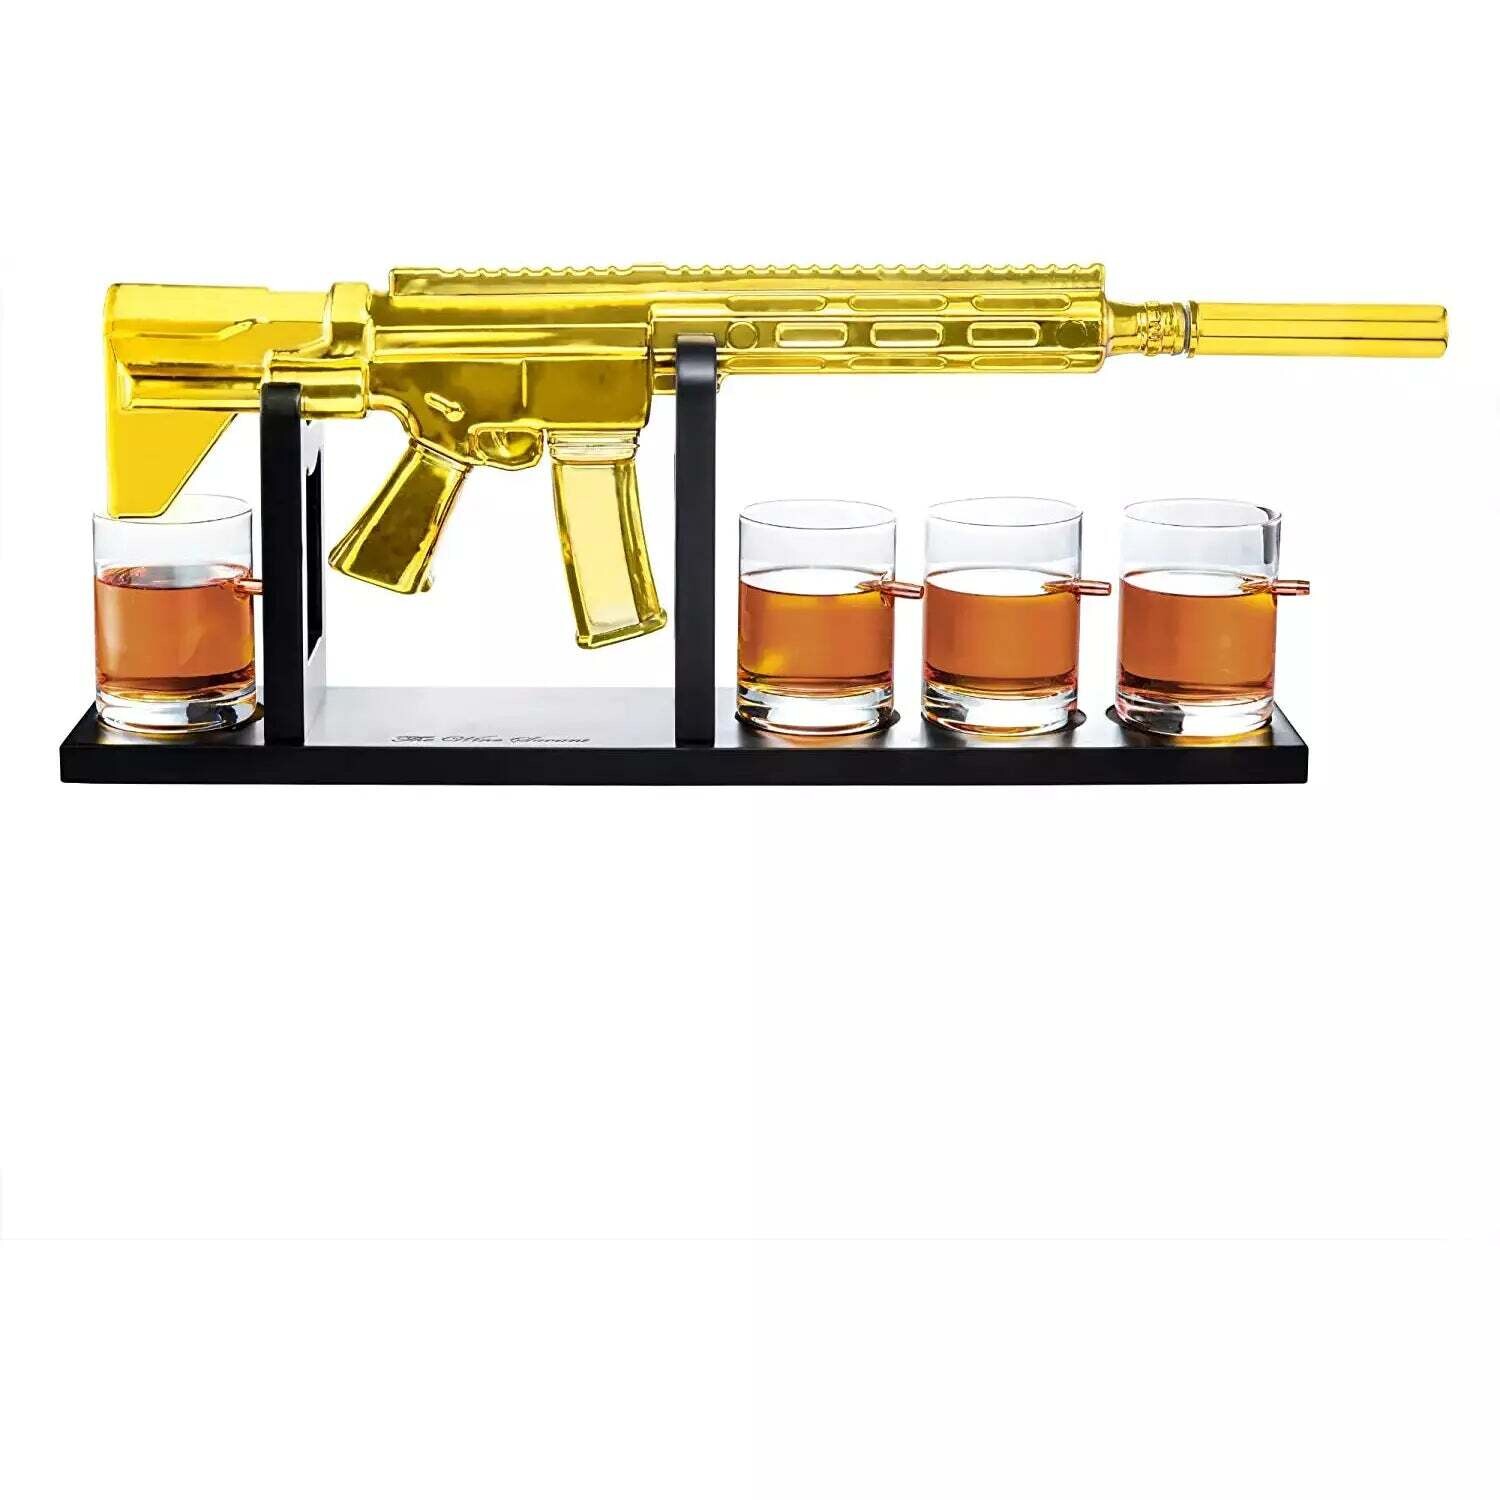 AR15 Gold Whiskey Decanter Set with 4 Bullet Whiskey Glasses a Gift for Fathers, Uncles, Sons - Veteran Gifts, Military Gift, Home Bar Gift, Father's Day